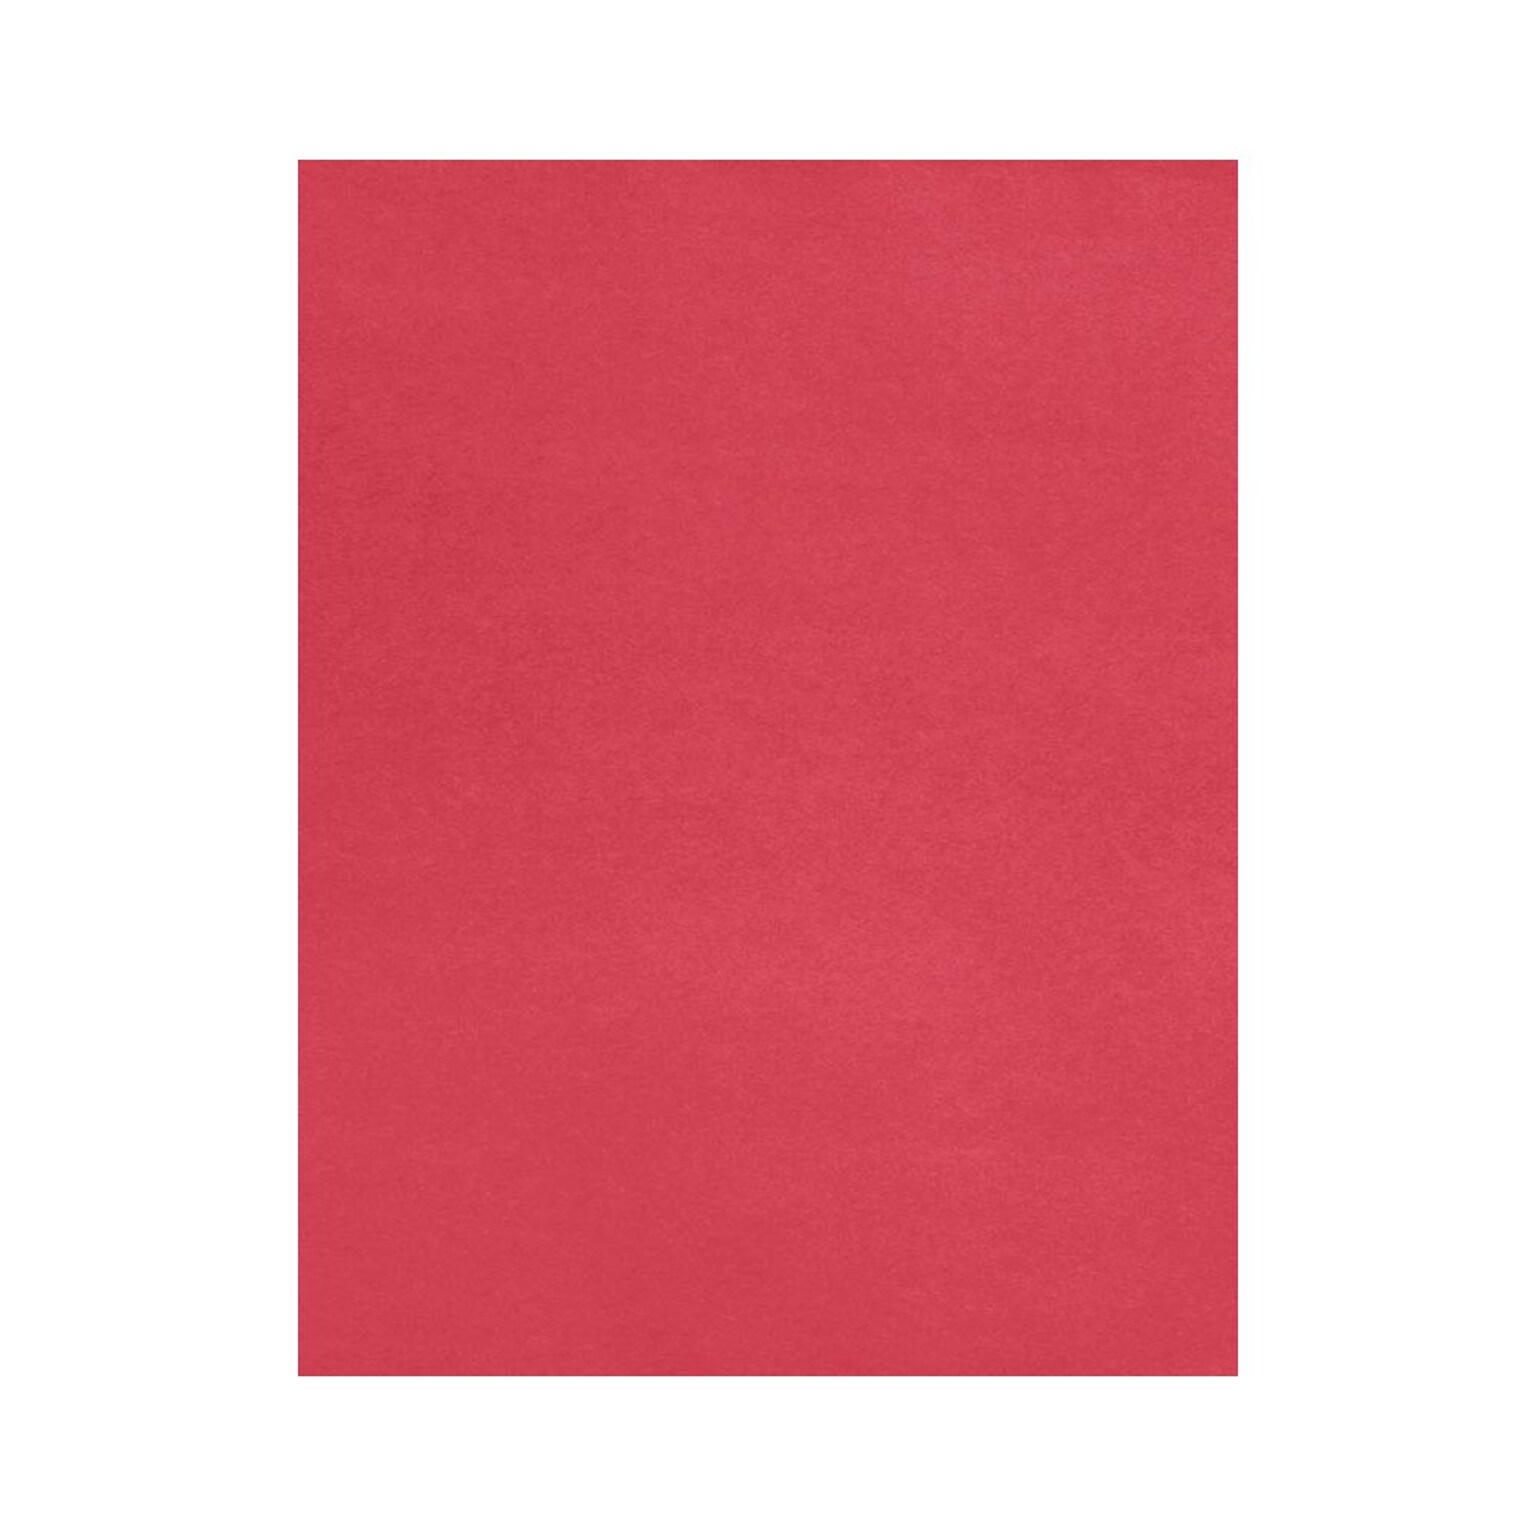 LUX 8.5 x 11 Colored Paper, 32 lbs., Holiday Red, 50 Sheets/Pack (81211-P-20-50)